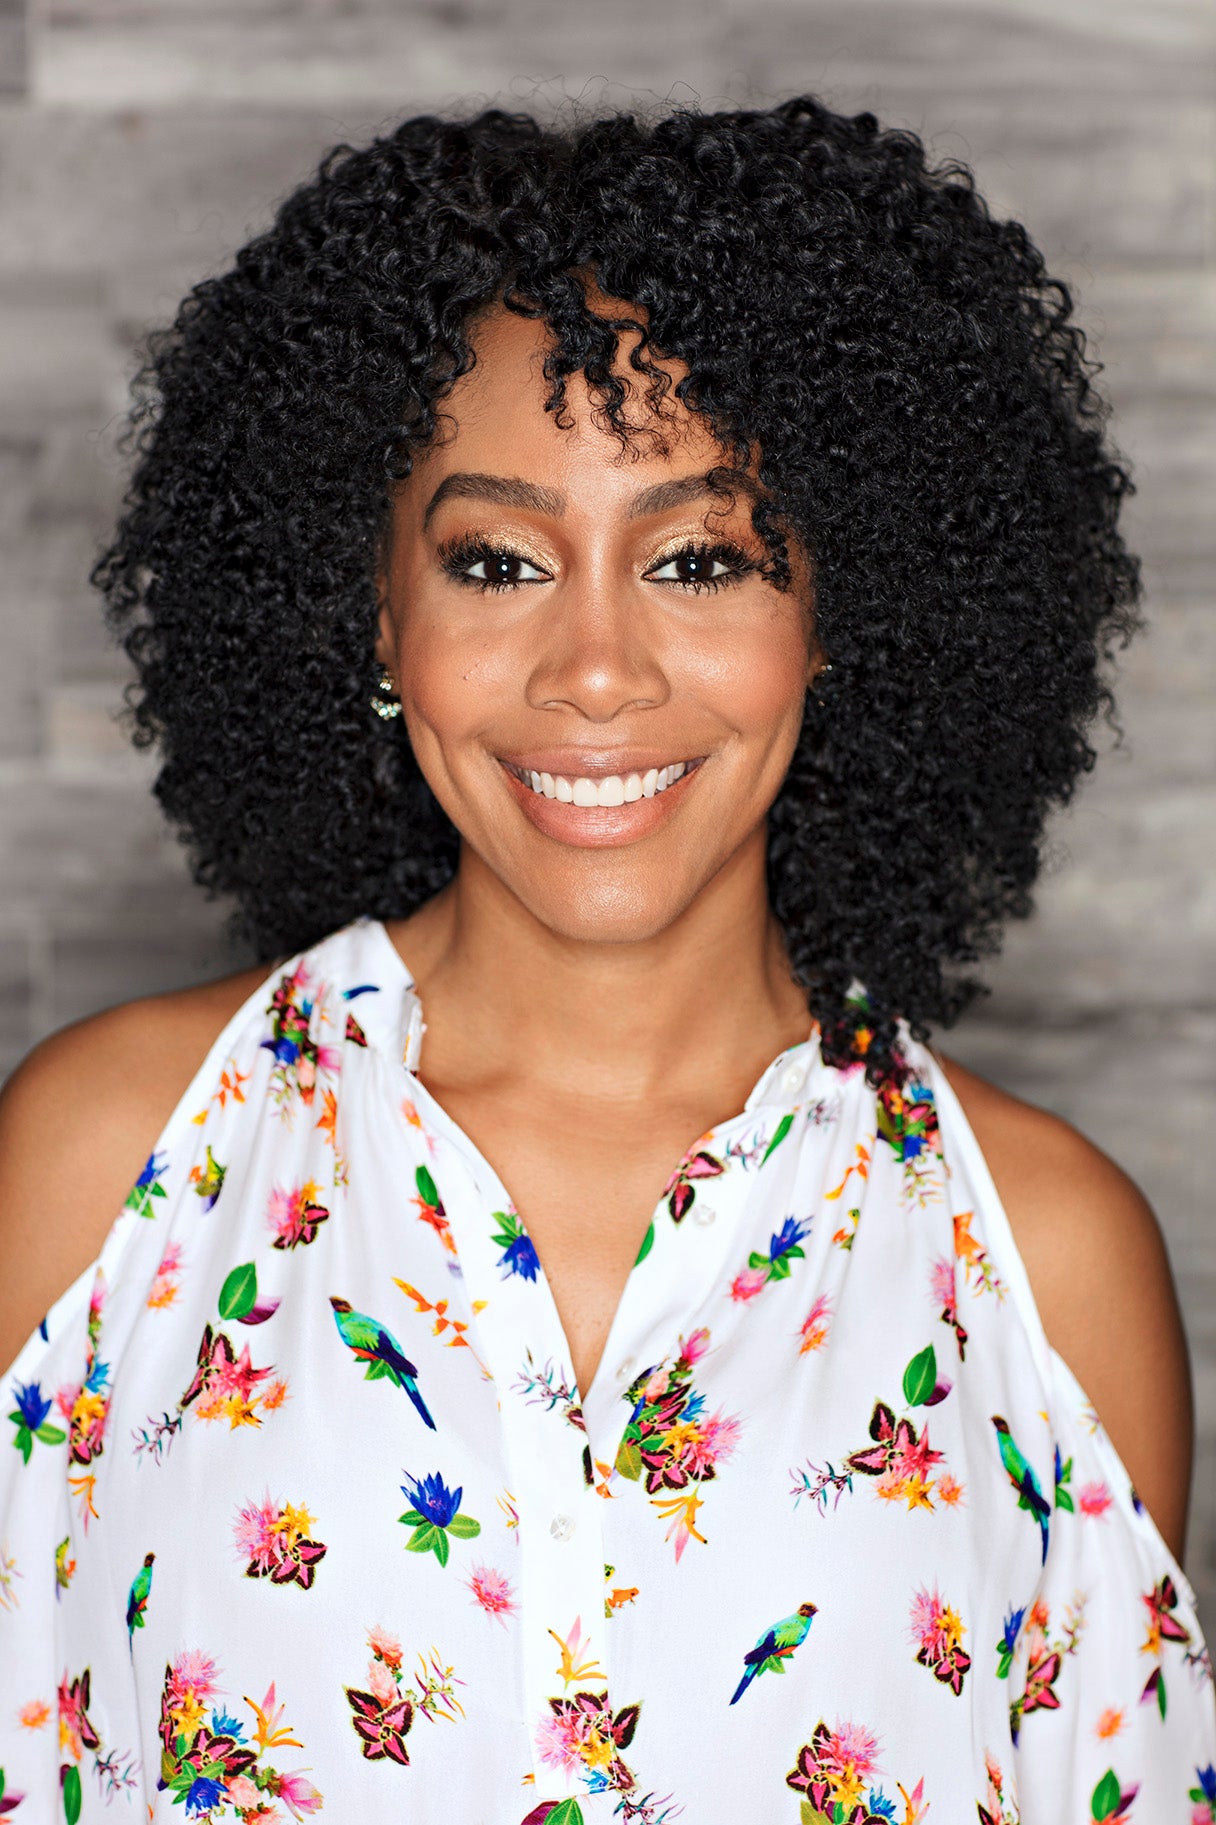 A Day in the Beautiful Life of Simone Missick